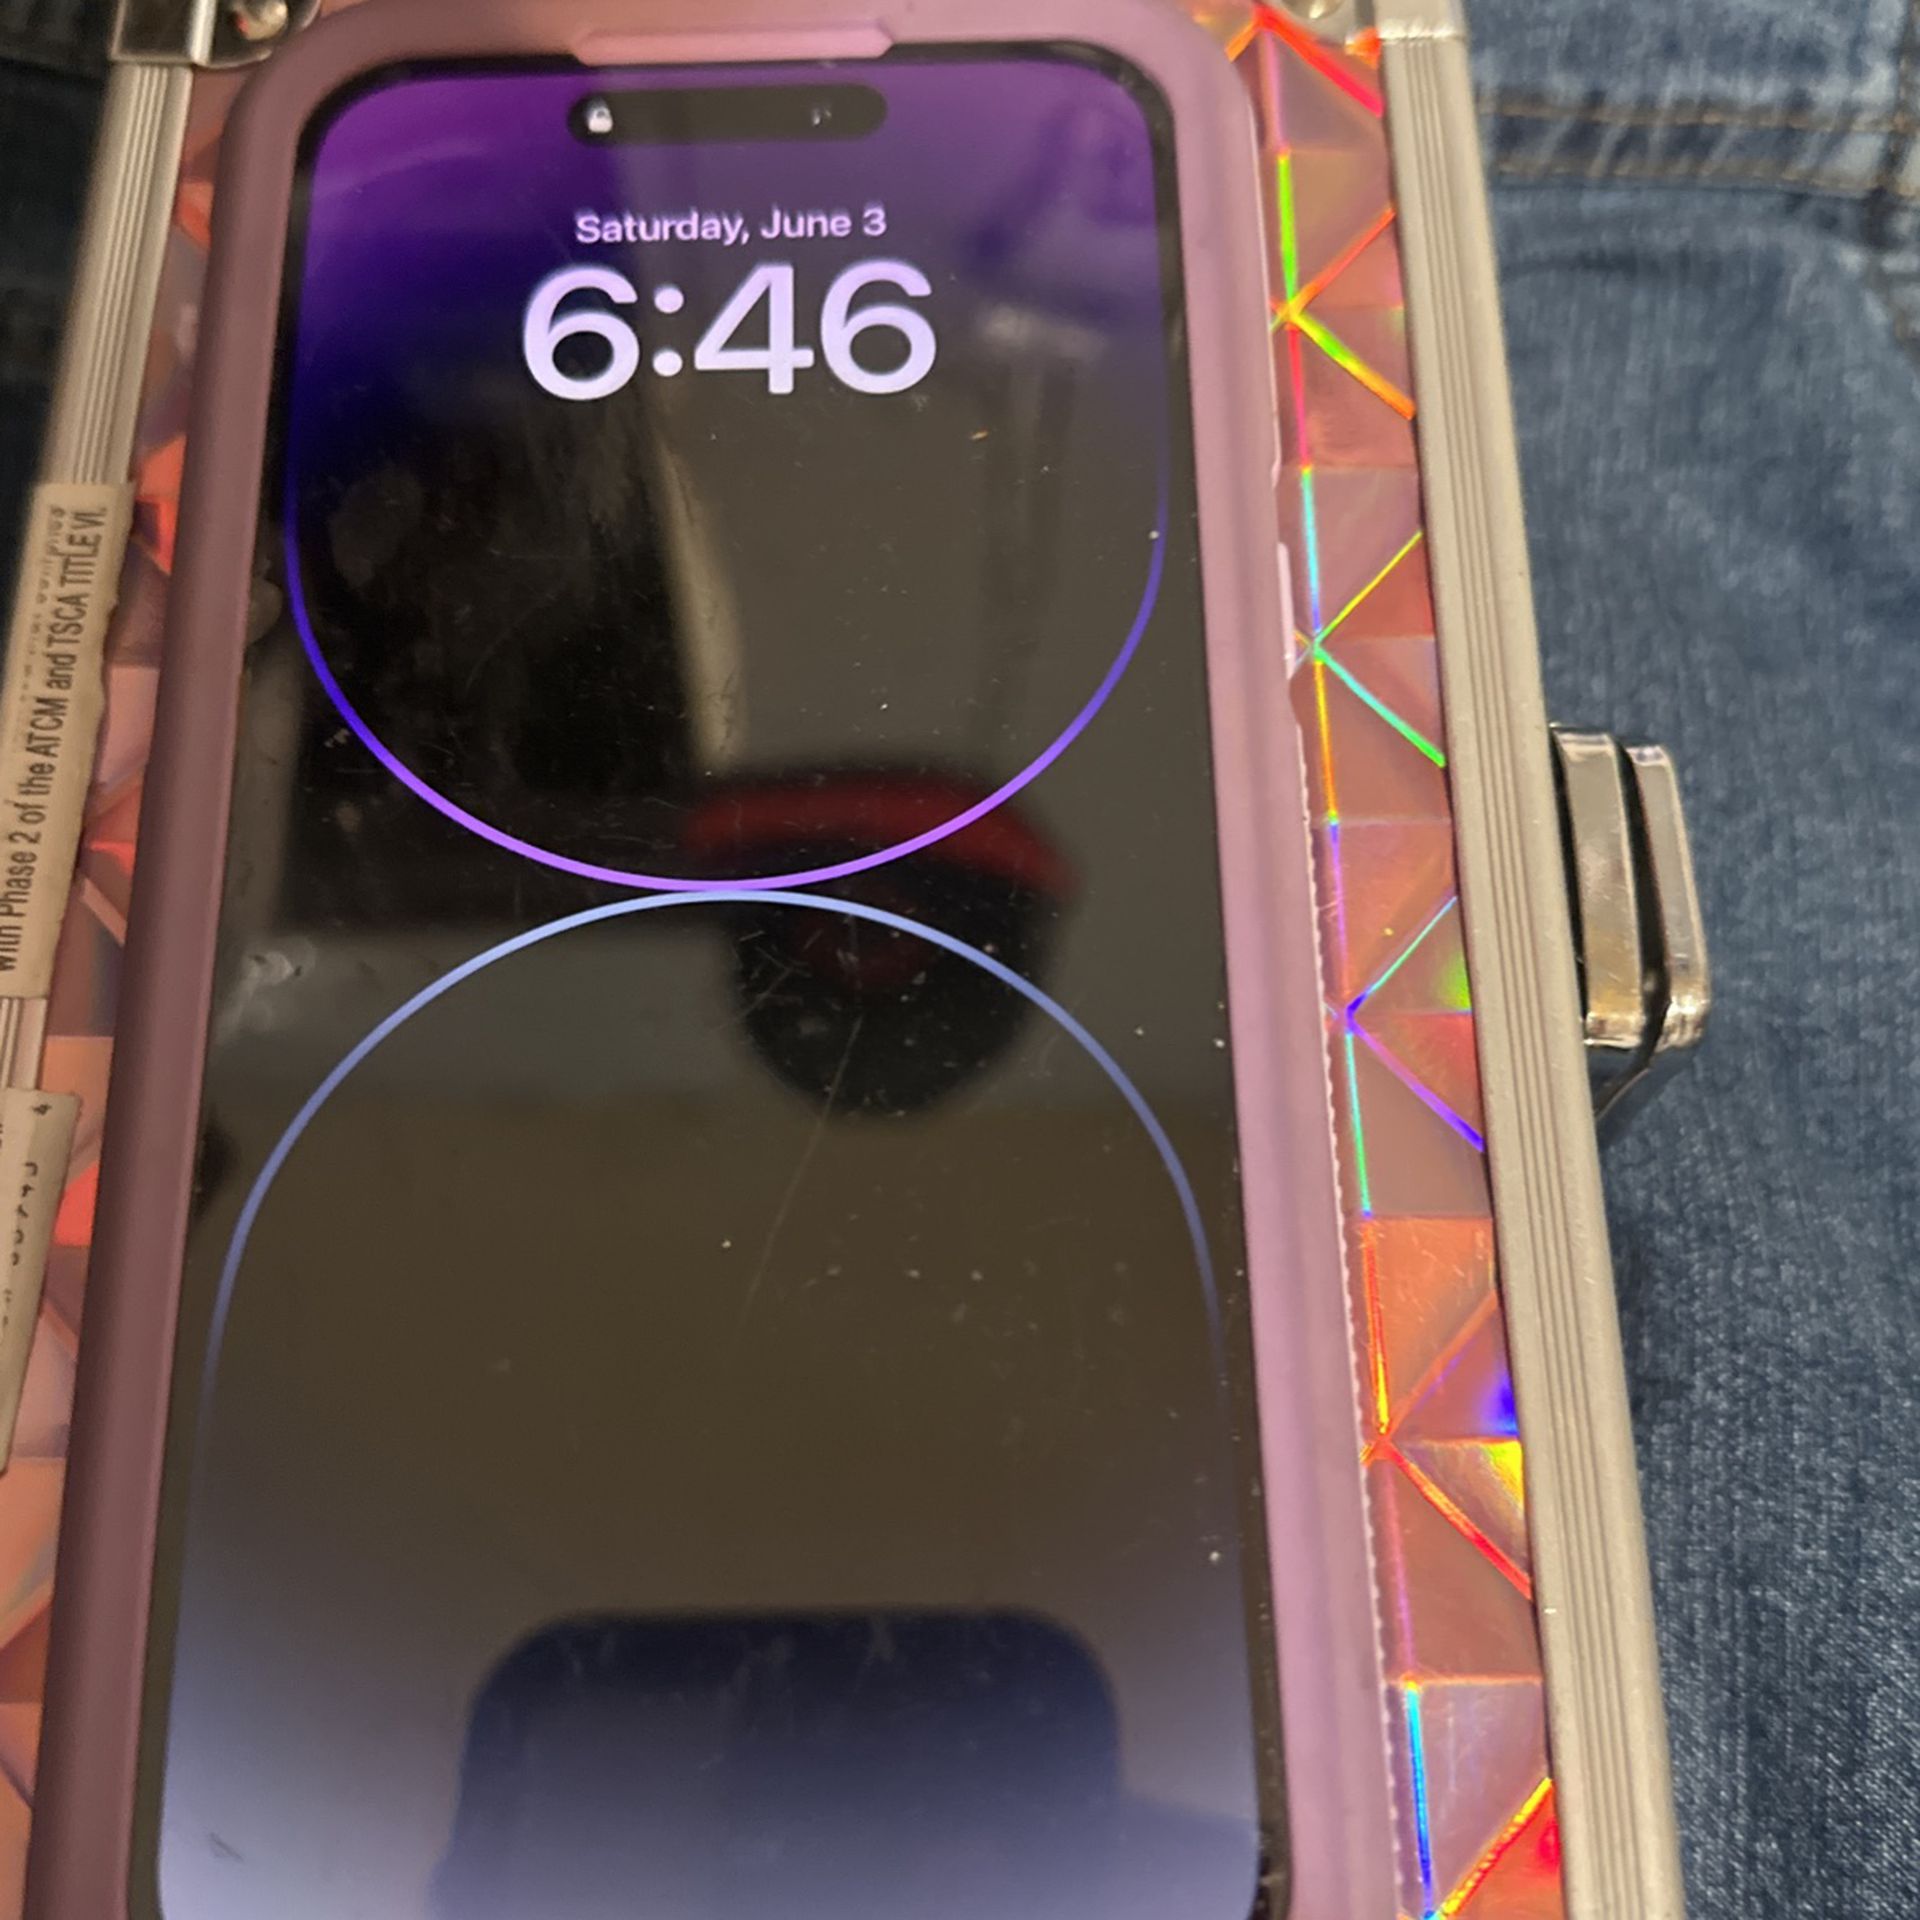 I Got Two iPhones One Gold And One Purple